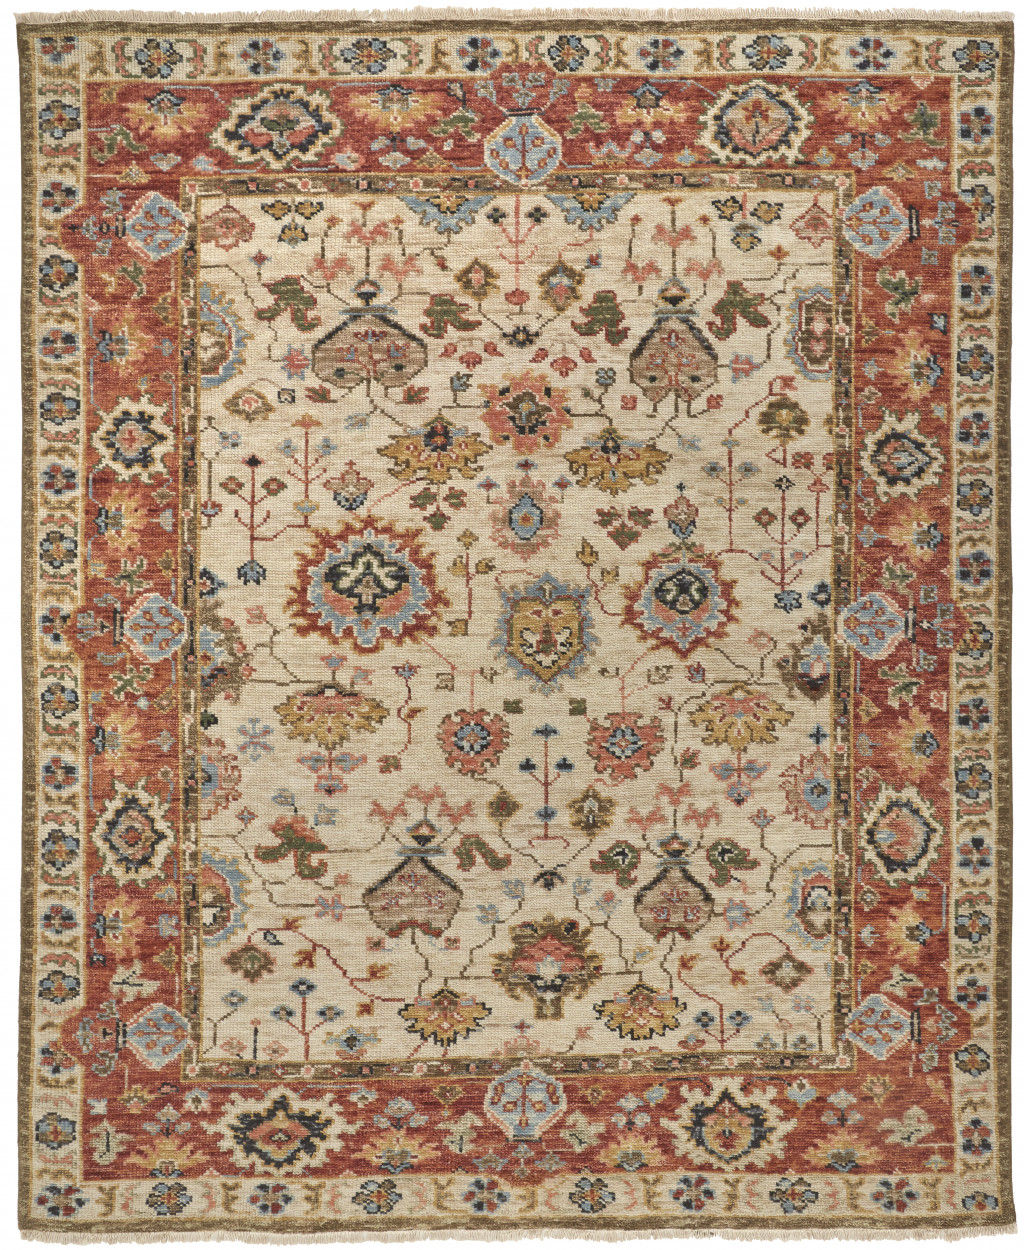 2' X 3' Ivory Red And Blue Wool Floral Hand Knotted Stain Resistant Area Rug-512659-1